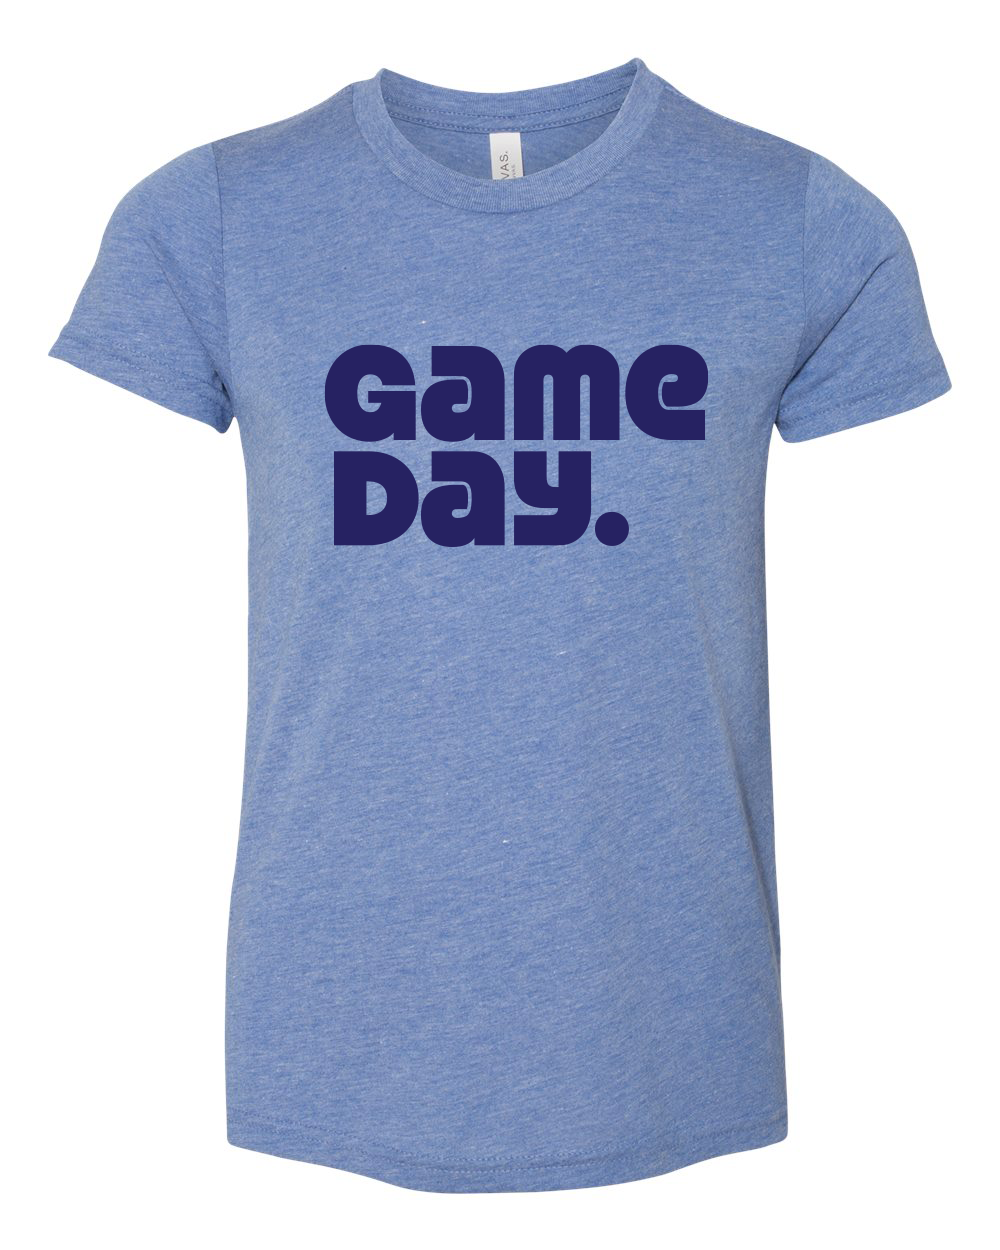 Graphic Tee - Game Day Lt Blue/Navy